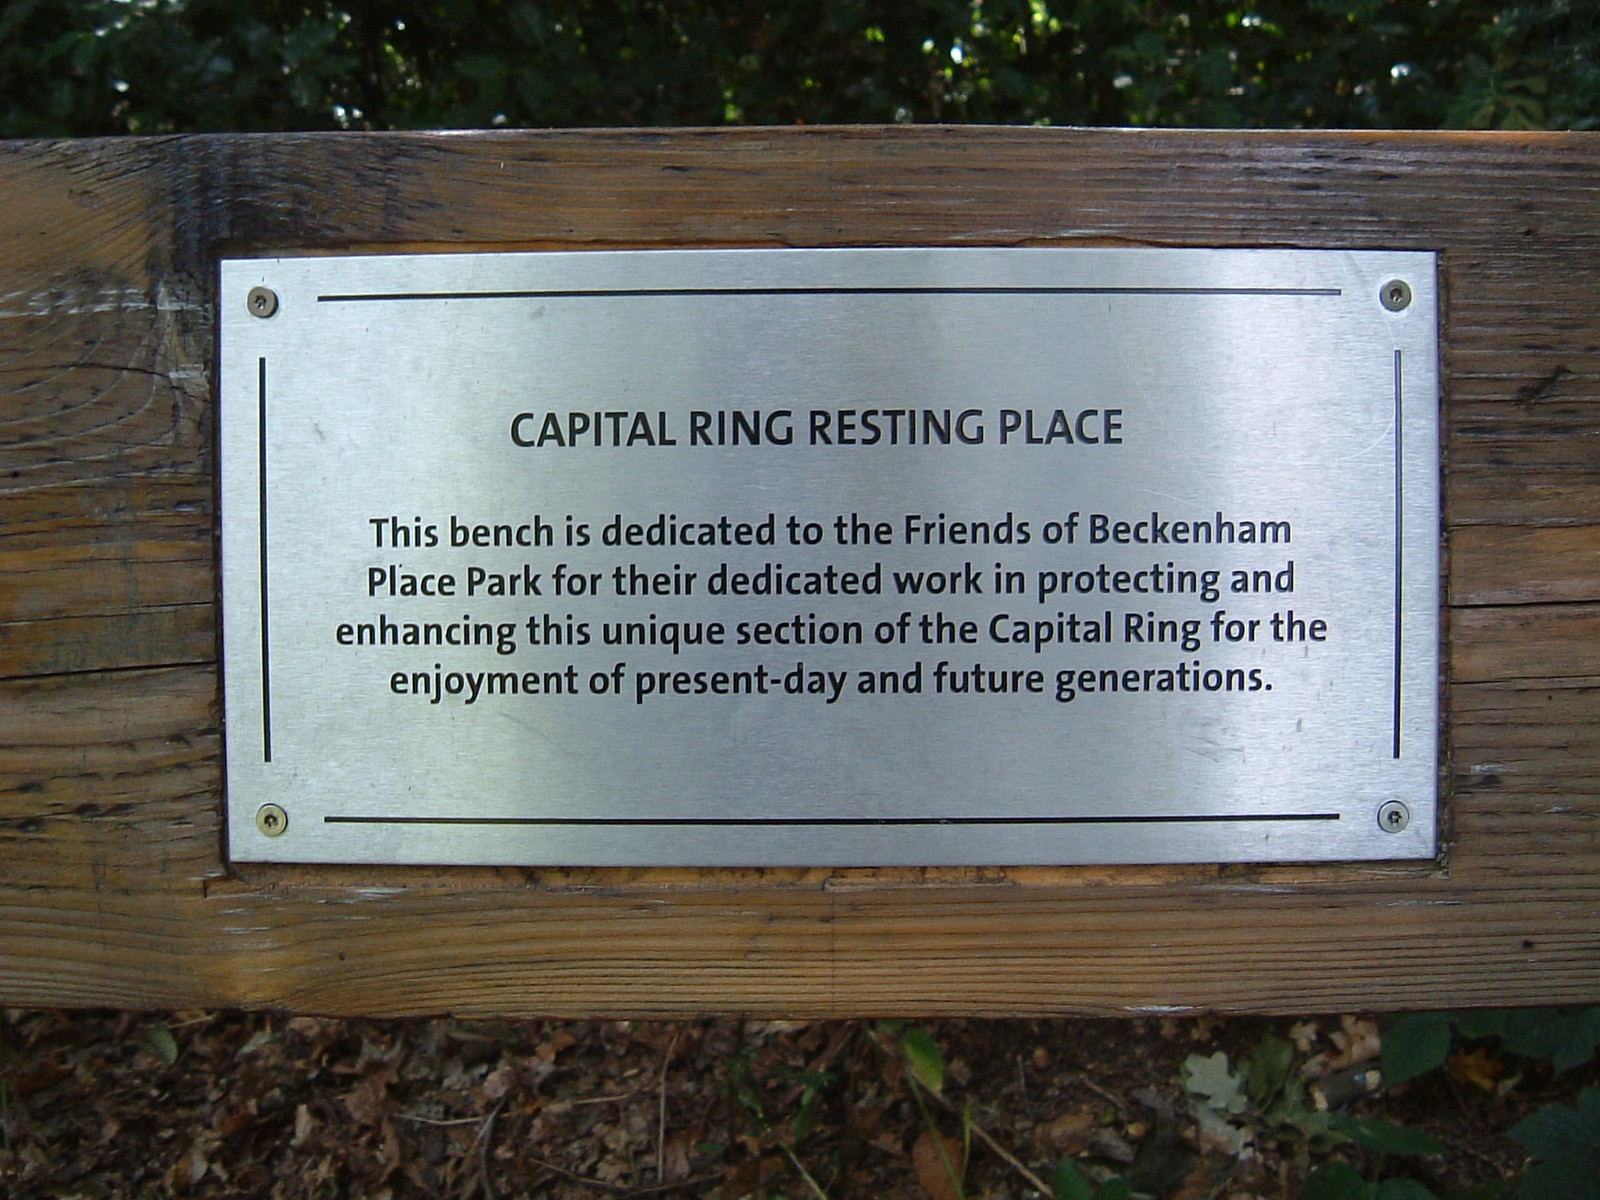 A dedication plaque on a bench in Beckenham Place Park